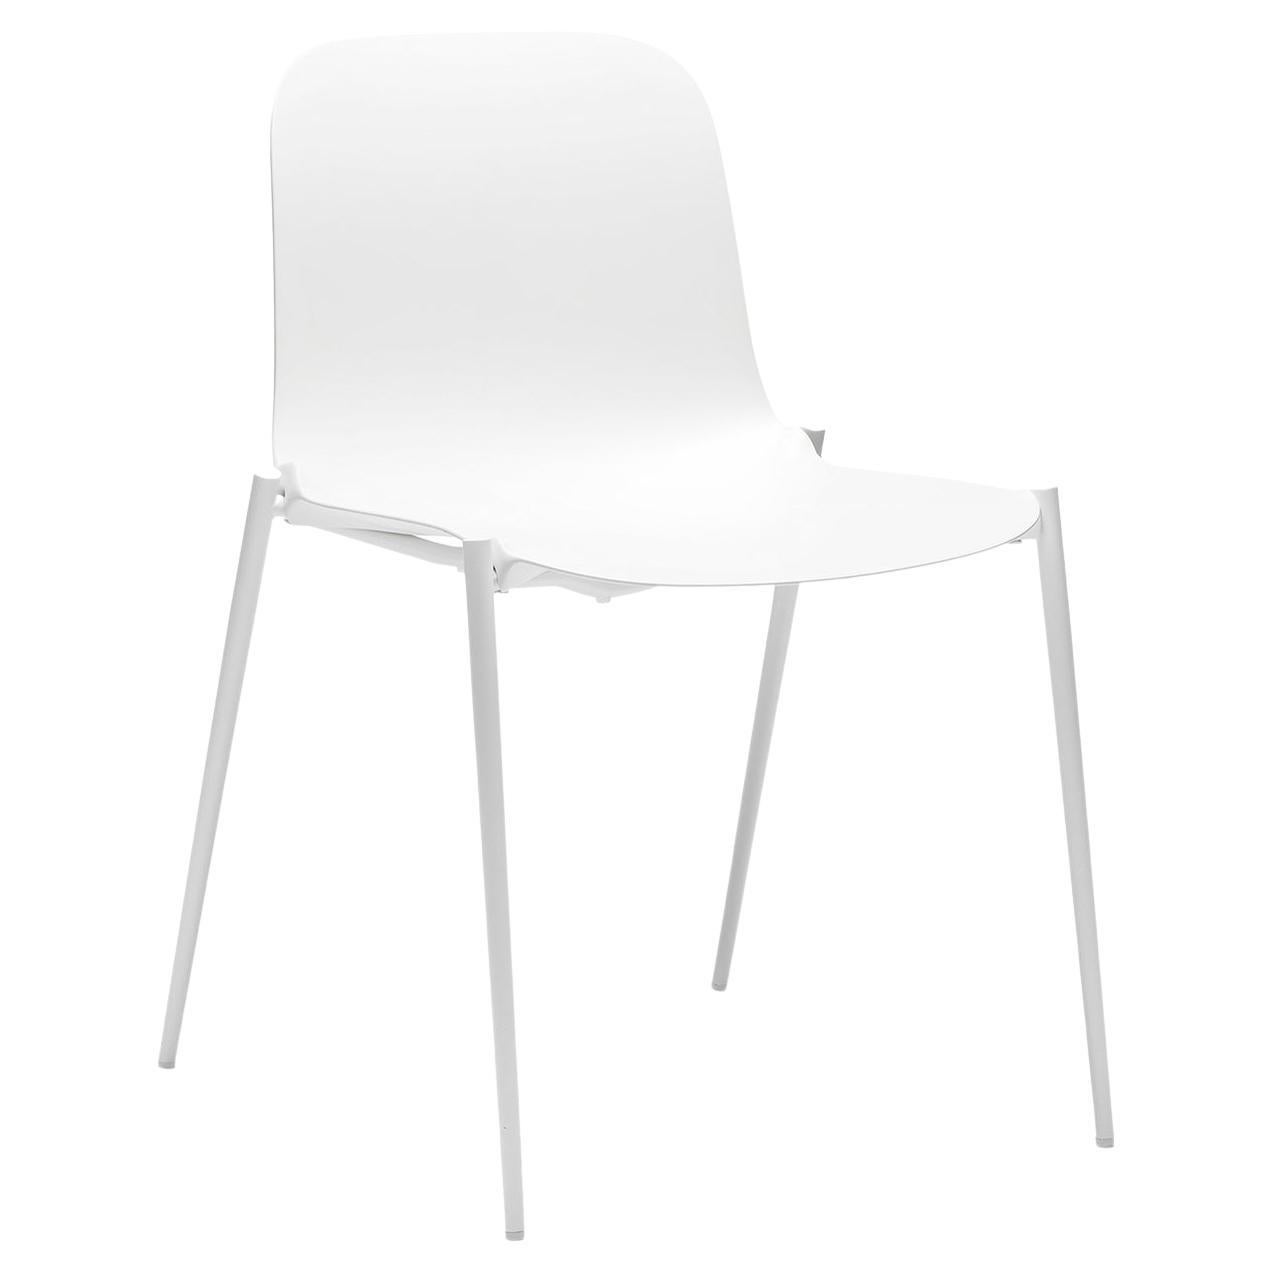 Set of 2 Dogo White Chair by Roberto Paoli